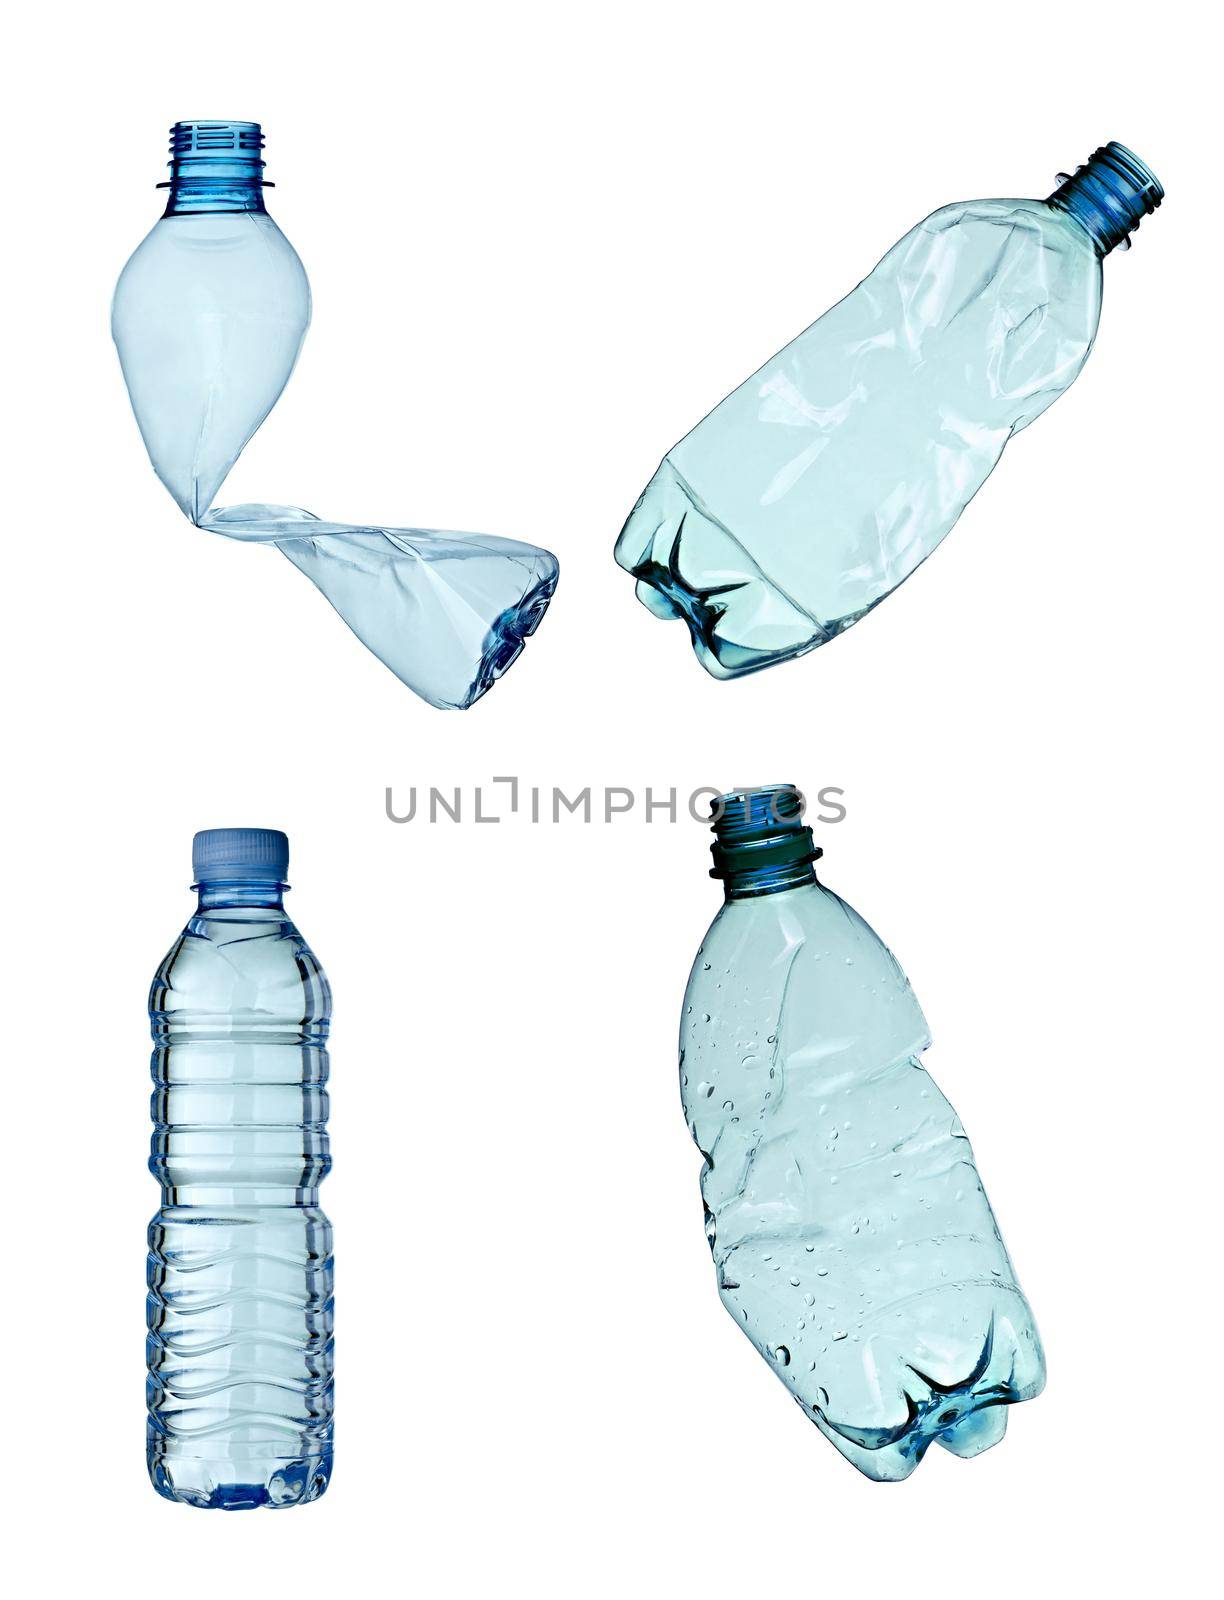 collection of various plastic bottles on white background. each one is shot separately